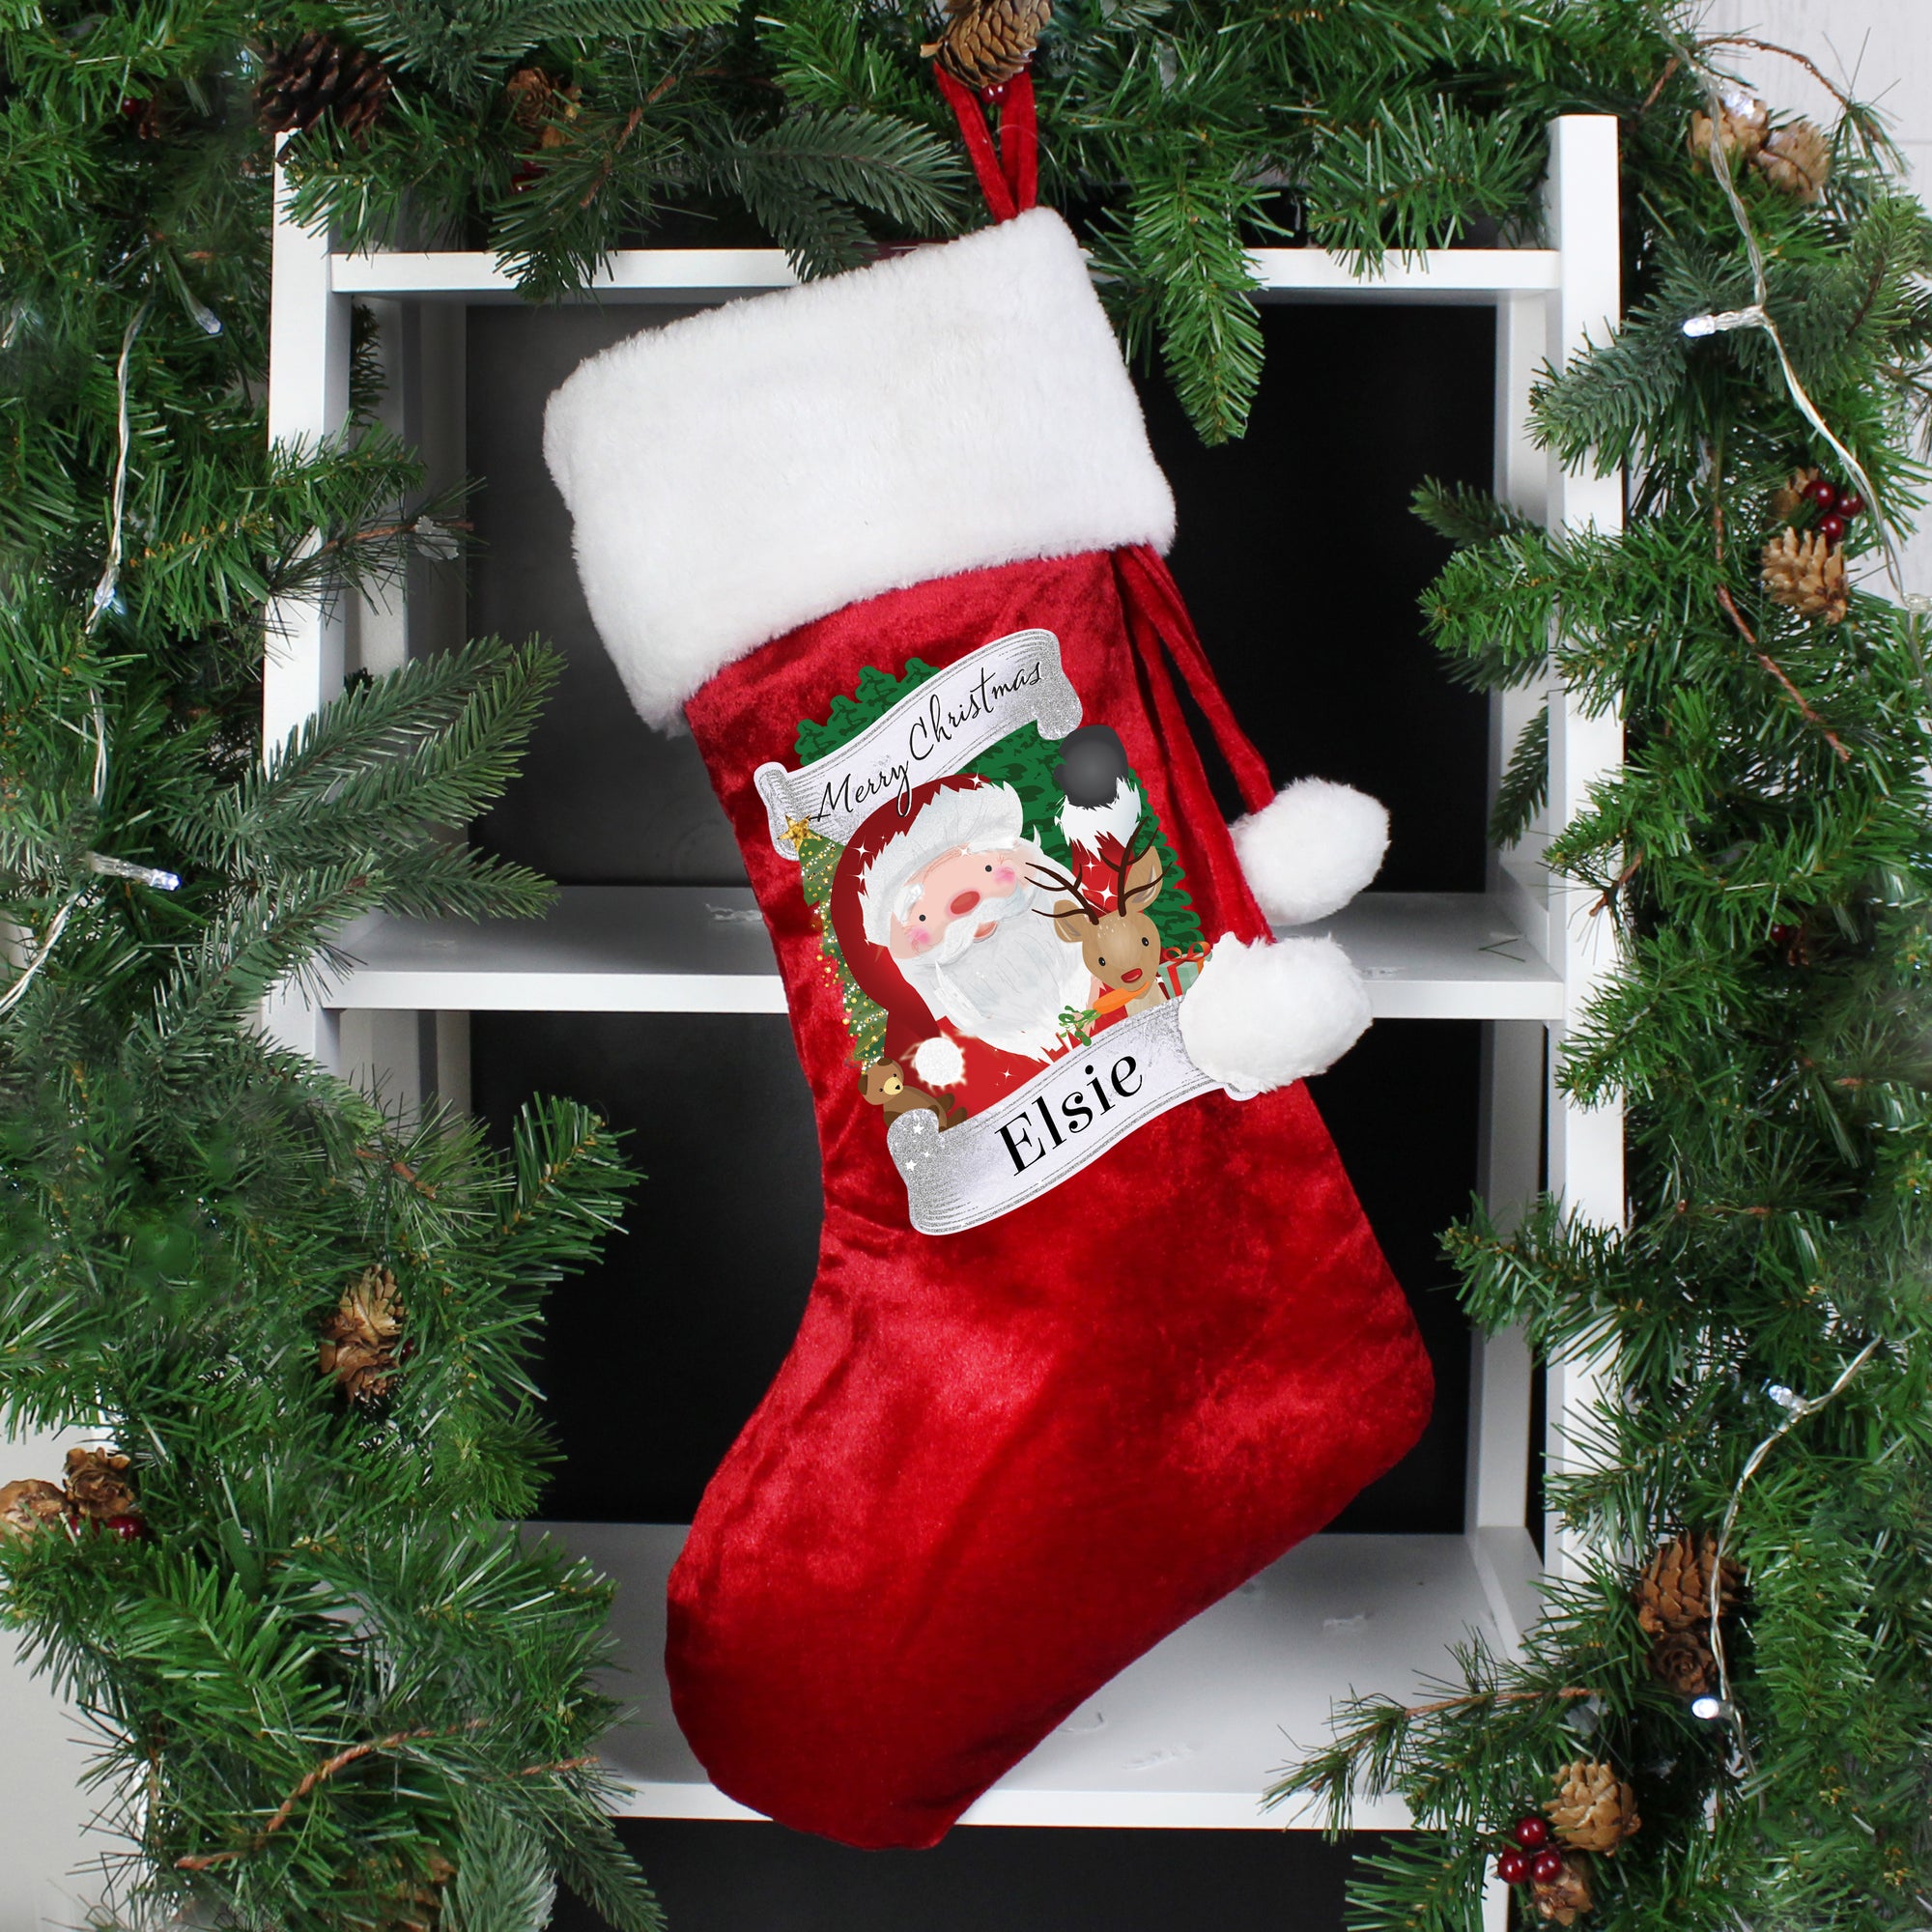 Personalised soft red velvet Christmas stocking featuring an cartoon illustration of Santa and the wording Merry Christmas. There is a white fur cuff on the top of the stocking along with a hoop to hang it from. The front of the stocking can be personalised with a name of your choice of up to 12 characters which will be printed just below the illustration of Santa in a black font.